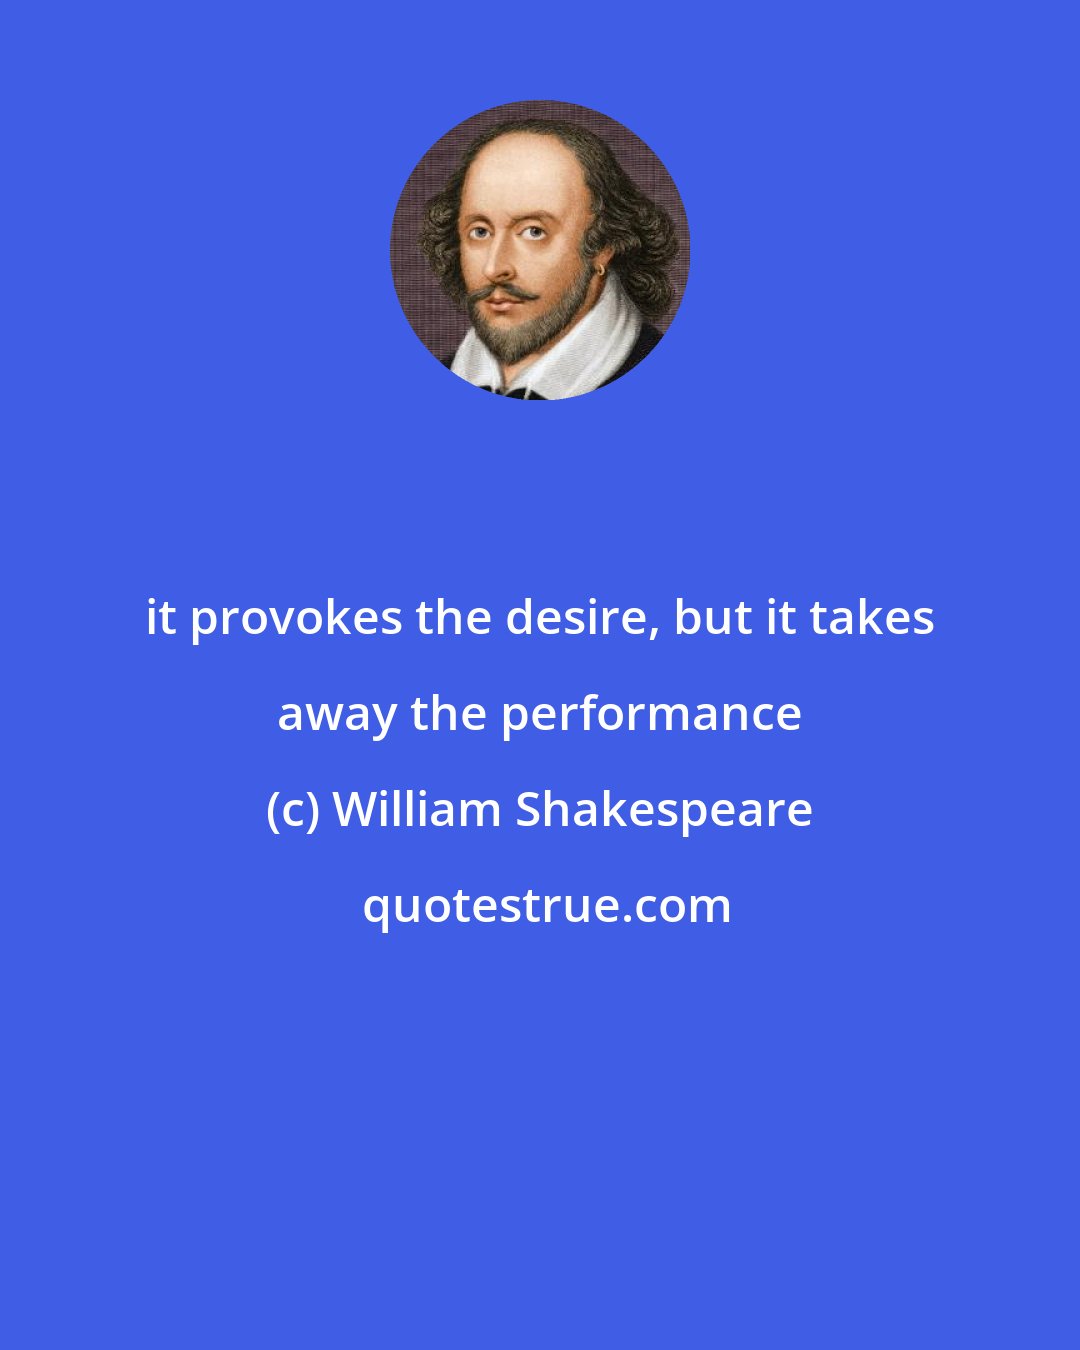 William Shakespeare: it provokes the desire, but it takes away the performance